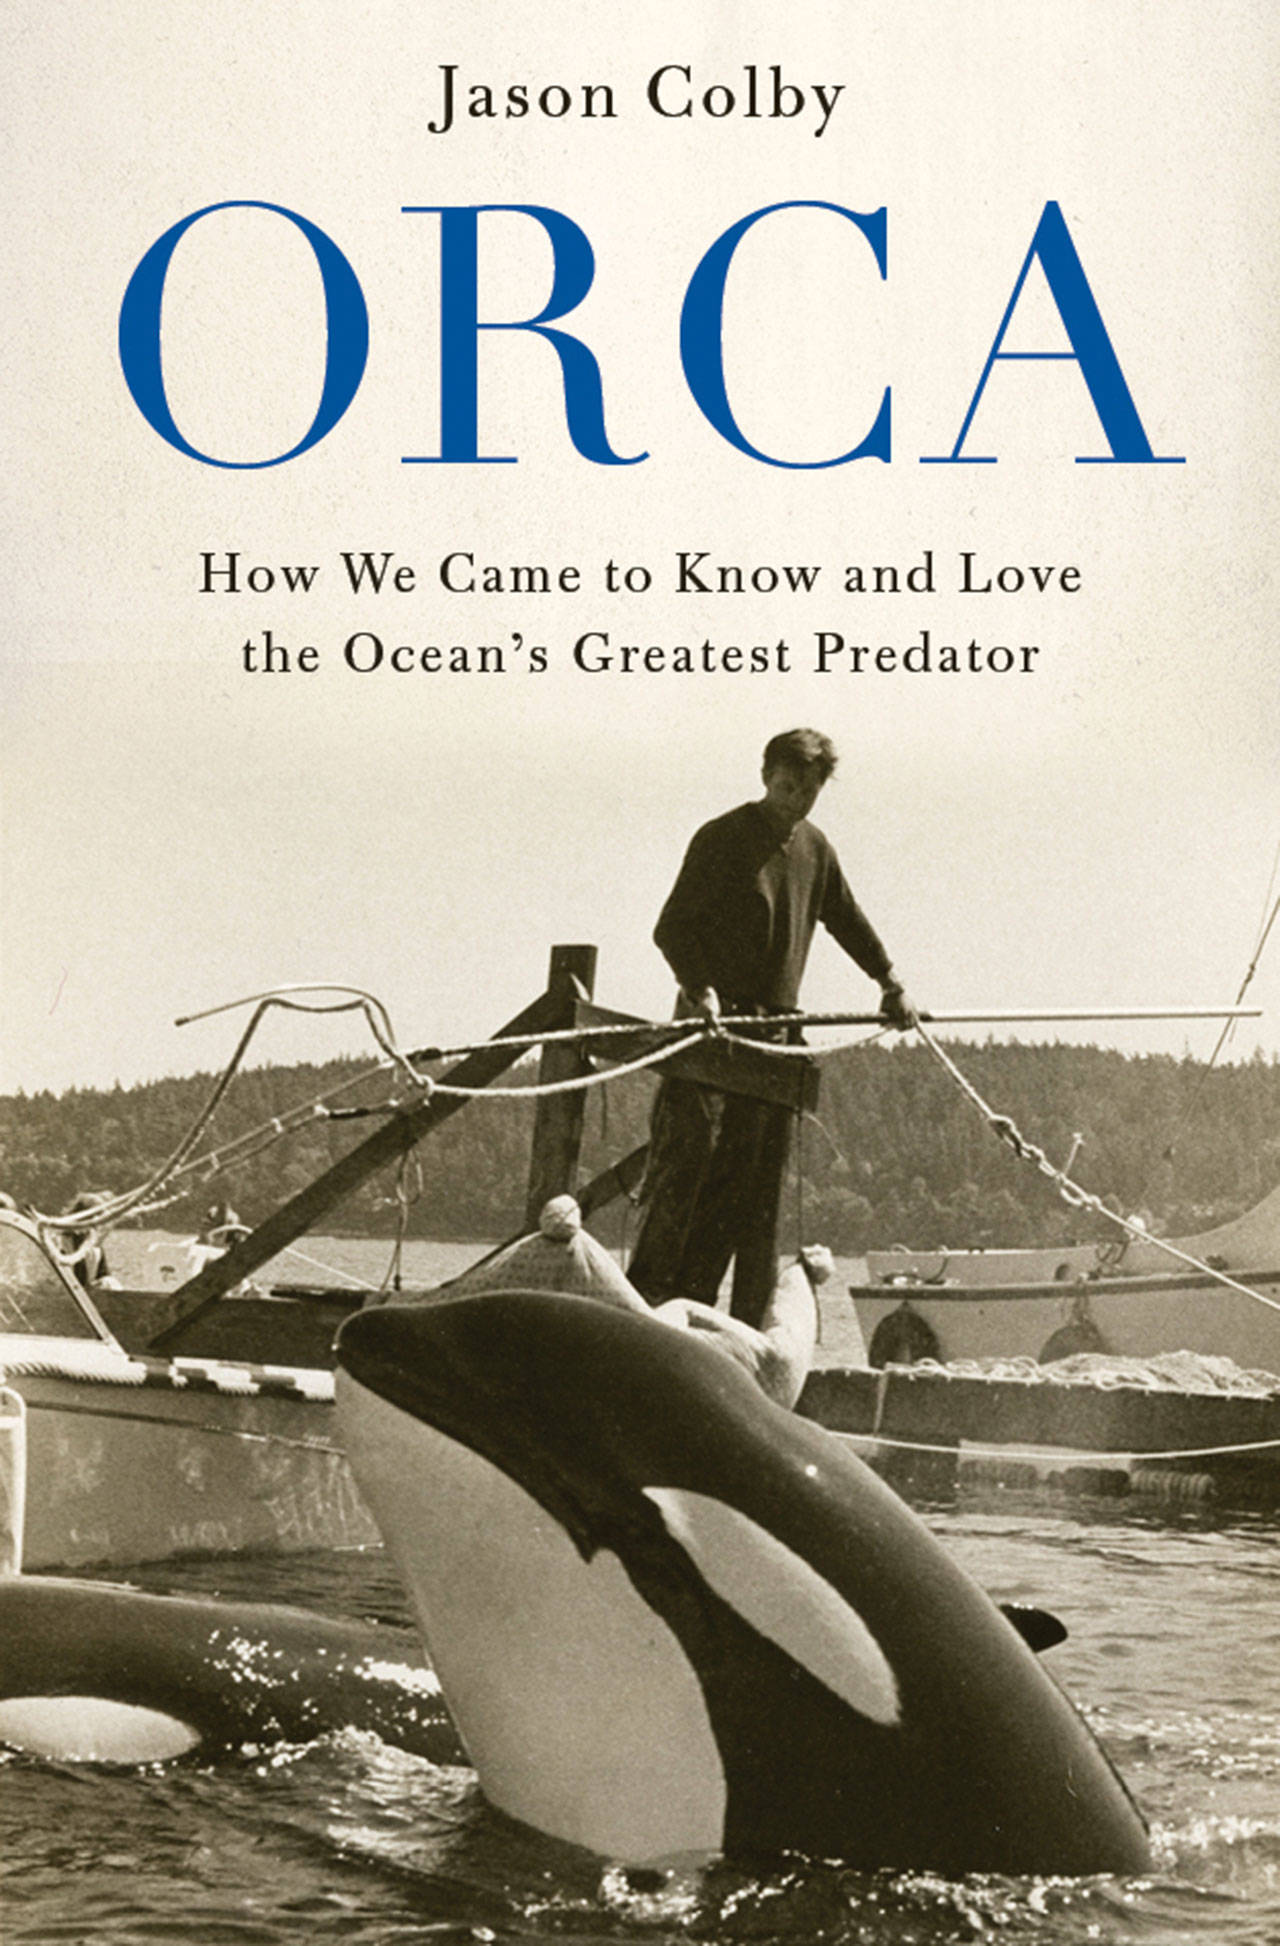 Image courtesy of Eagle Harbor Book Company | Jason M. Colby will visit Eagle Harbor Book Company at 6:30 p.m. Monday, June 4 to discuss his new nonfiction book “Orca: How We Came to Know and Love the Ocean’s Greatest Predator.”